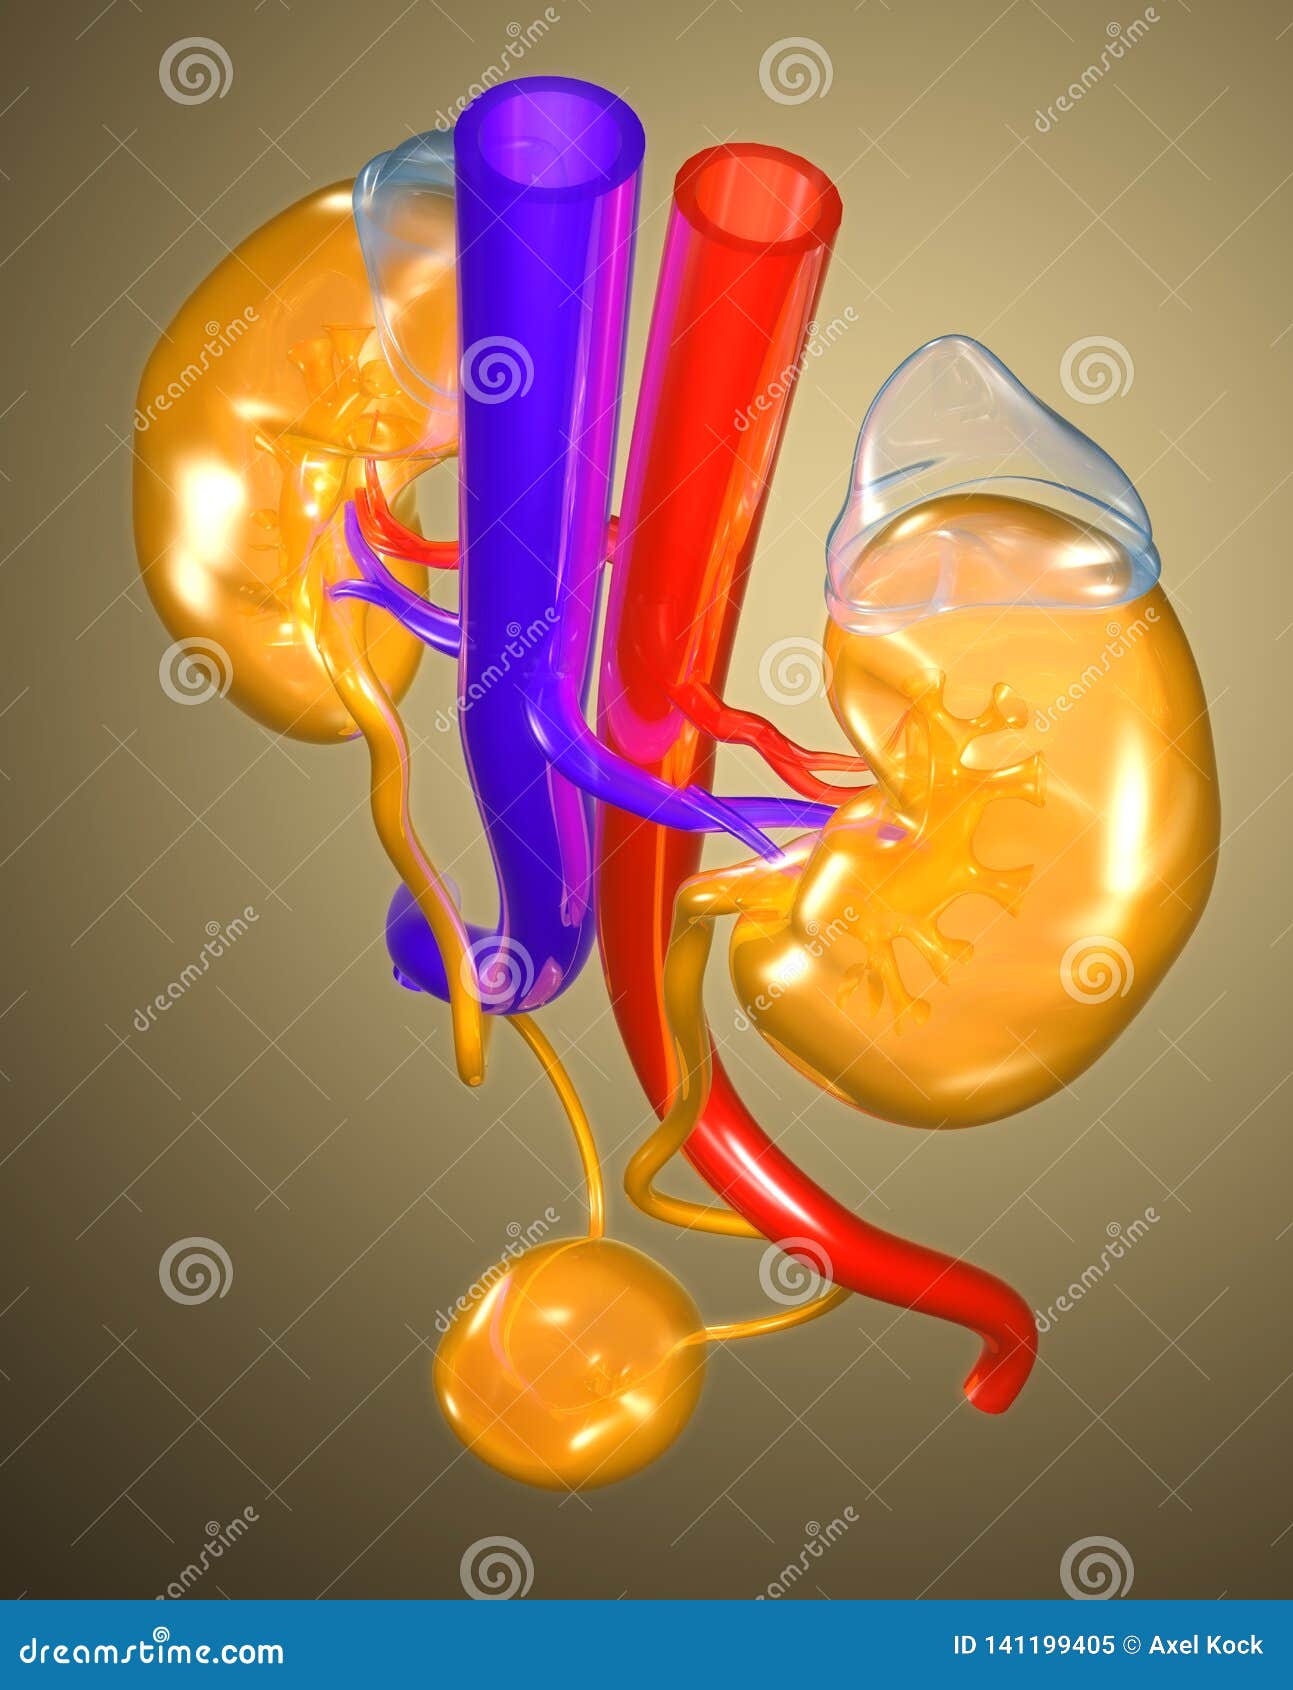 colorful urinary female urinary tract, medically 